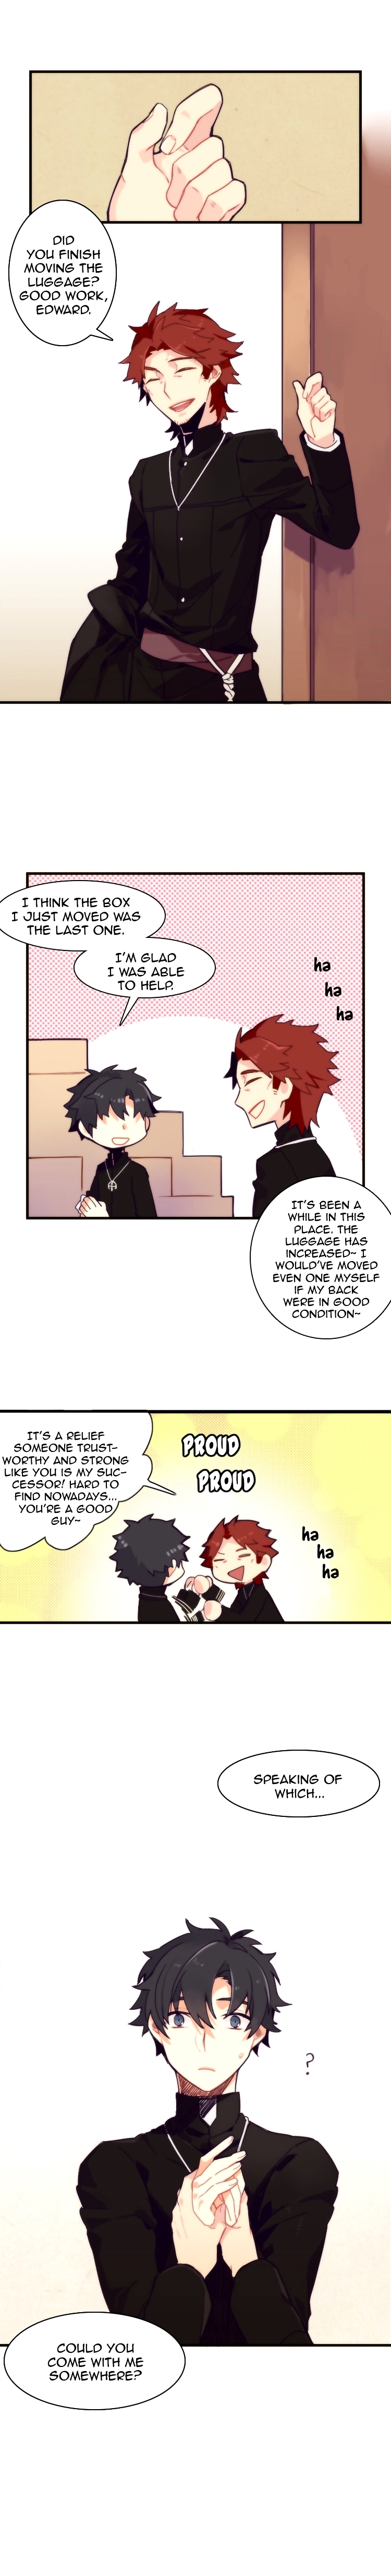 The Priest's Chart ch.1